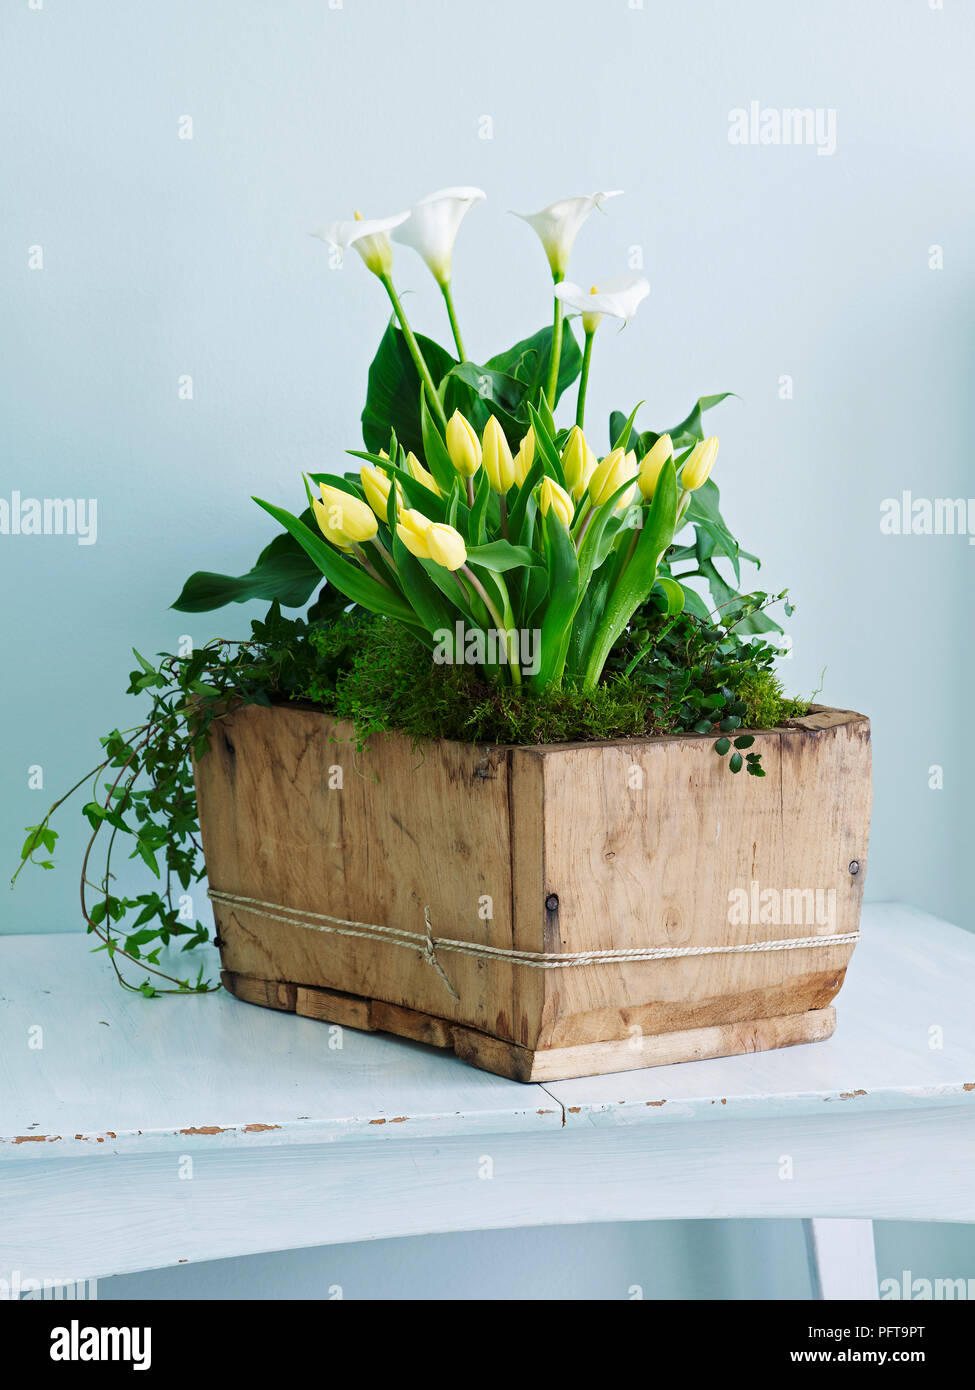 Tulips, calla lilies, trailing ivy arranged in wooden container Stock Photo